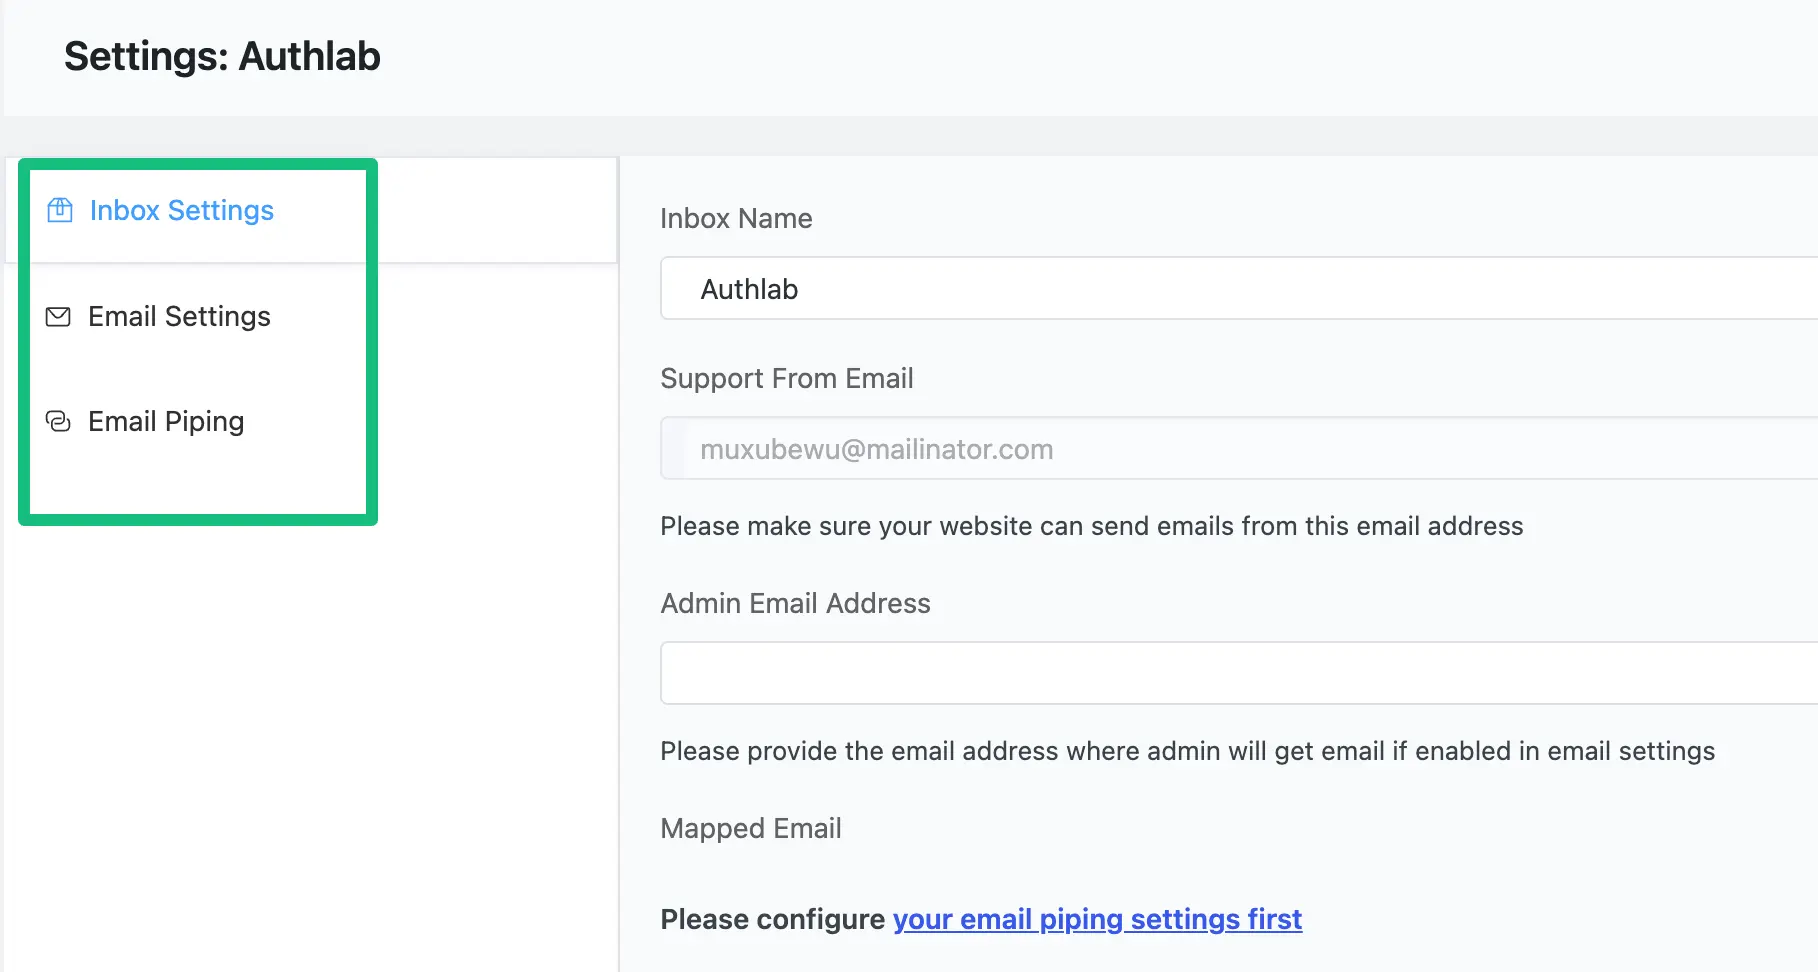 Three types of email-based settings in Business Inbox